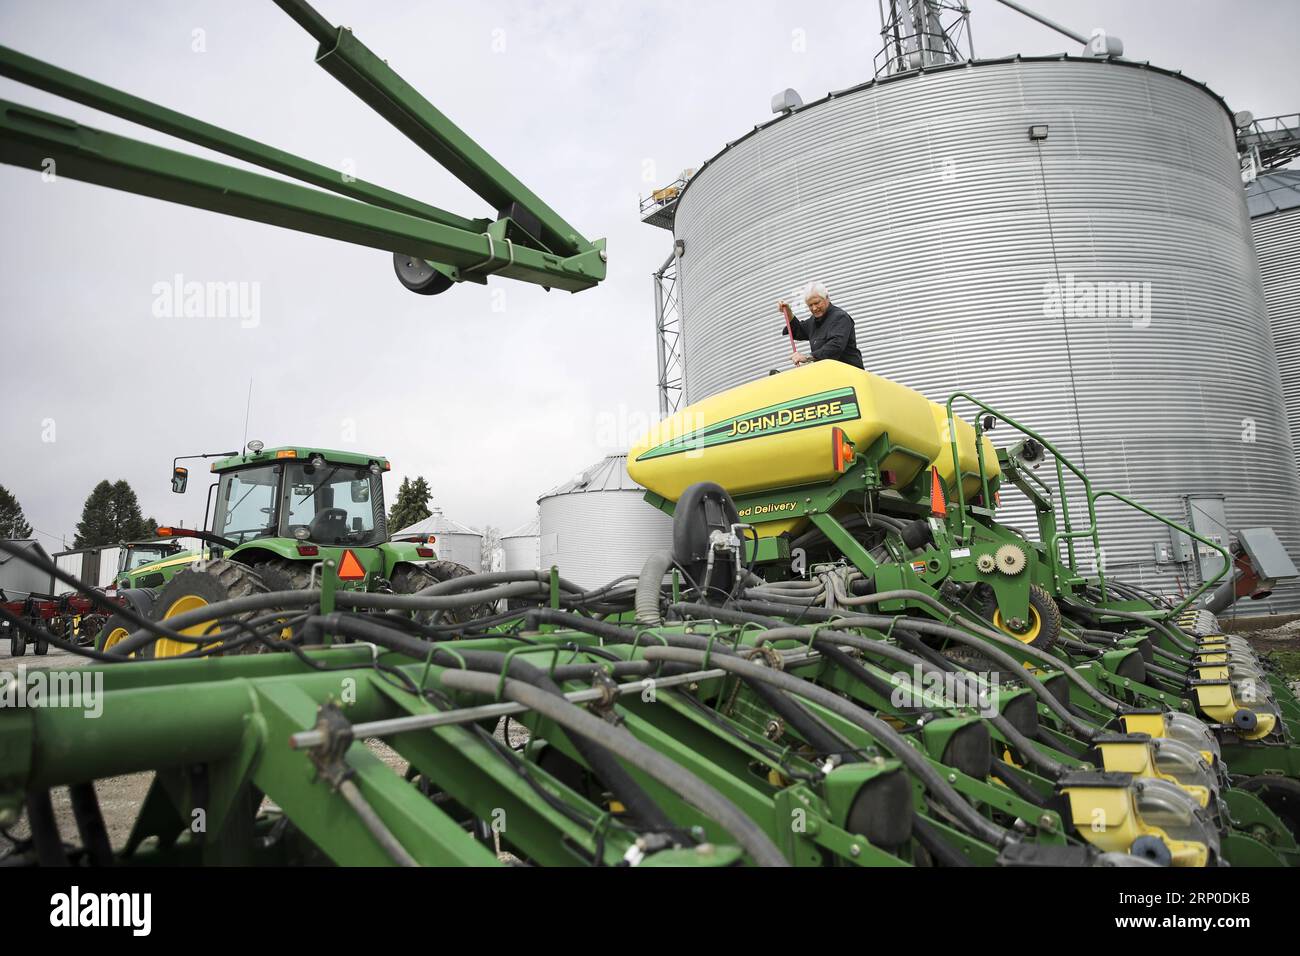 (180509) -- IOWA, May 9, 2018 -- Rick Kimberley checks a farming combine machine at his farm near Des Moines, capital of Iowa State, May 3, 2018. Rick and his son, Grant, grow more than 4,000 acres of corn and soybeans with a couple of hired hands and massive combines whose computers precisely track yield, moisture and other key statistics for each row and acre. He has been to China 15 times in recent years to talk about precision farming and other tricks of his trade, becoming an ambassador for modern farming methods in China. As for the current trade tensions between the United States and Ch Stock Photo